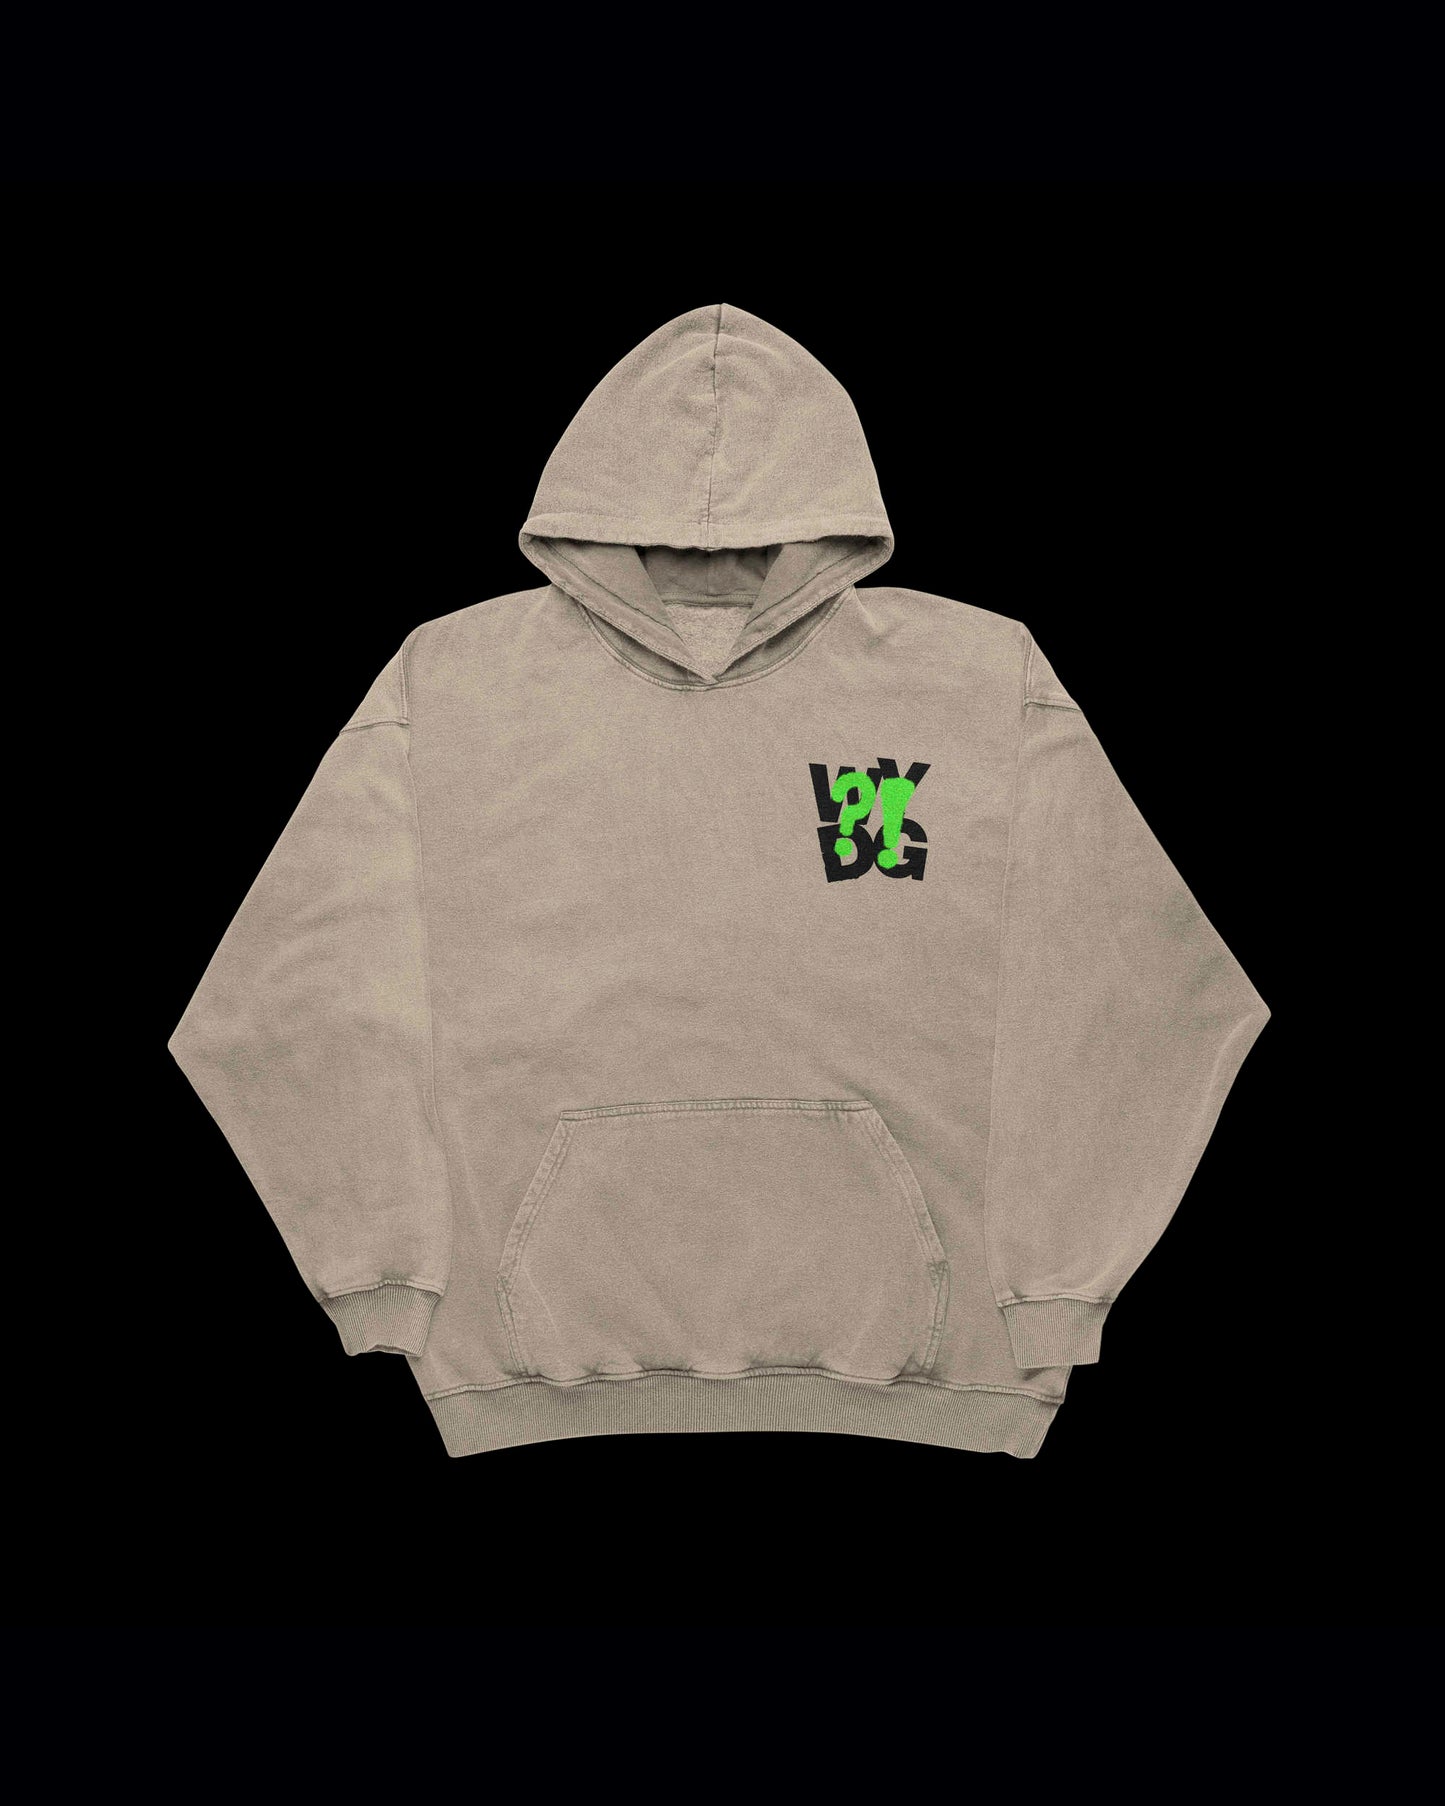 What You Don't Get (Beige Hoodie)